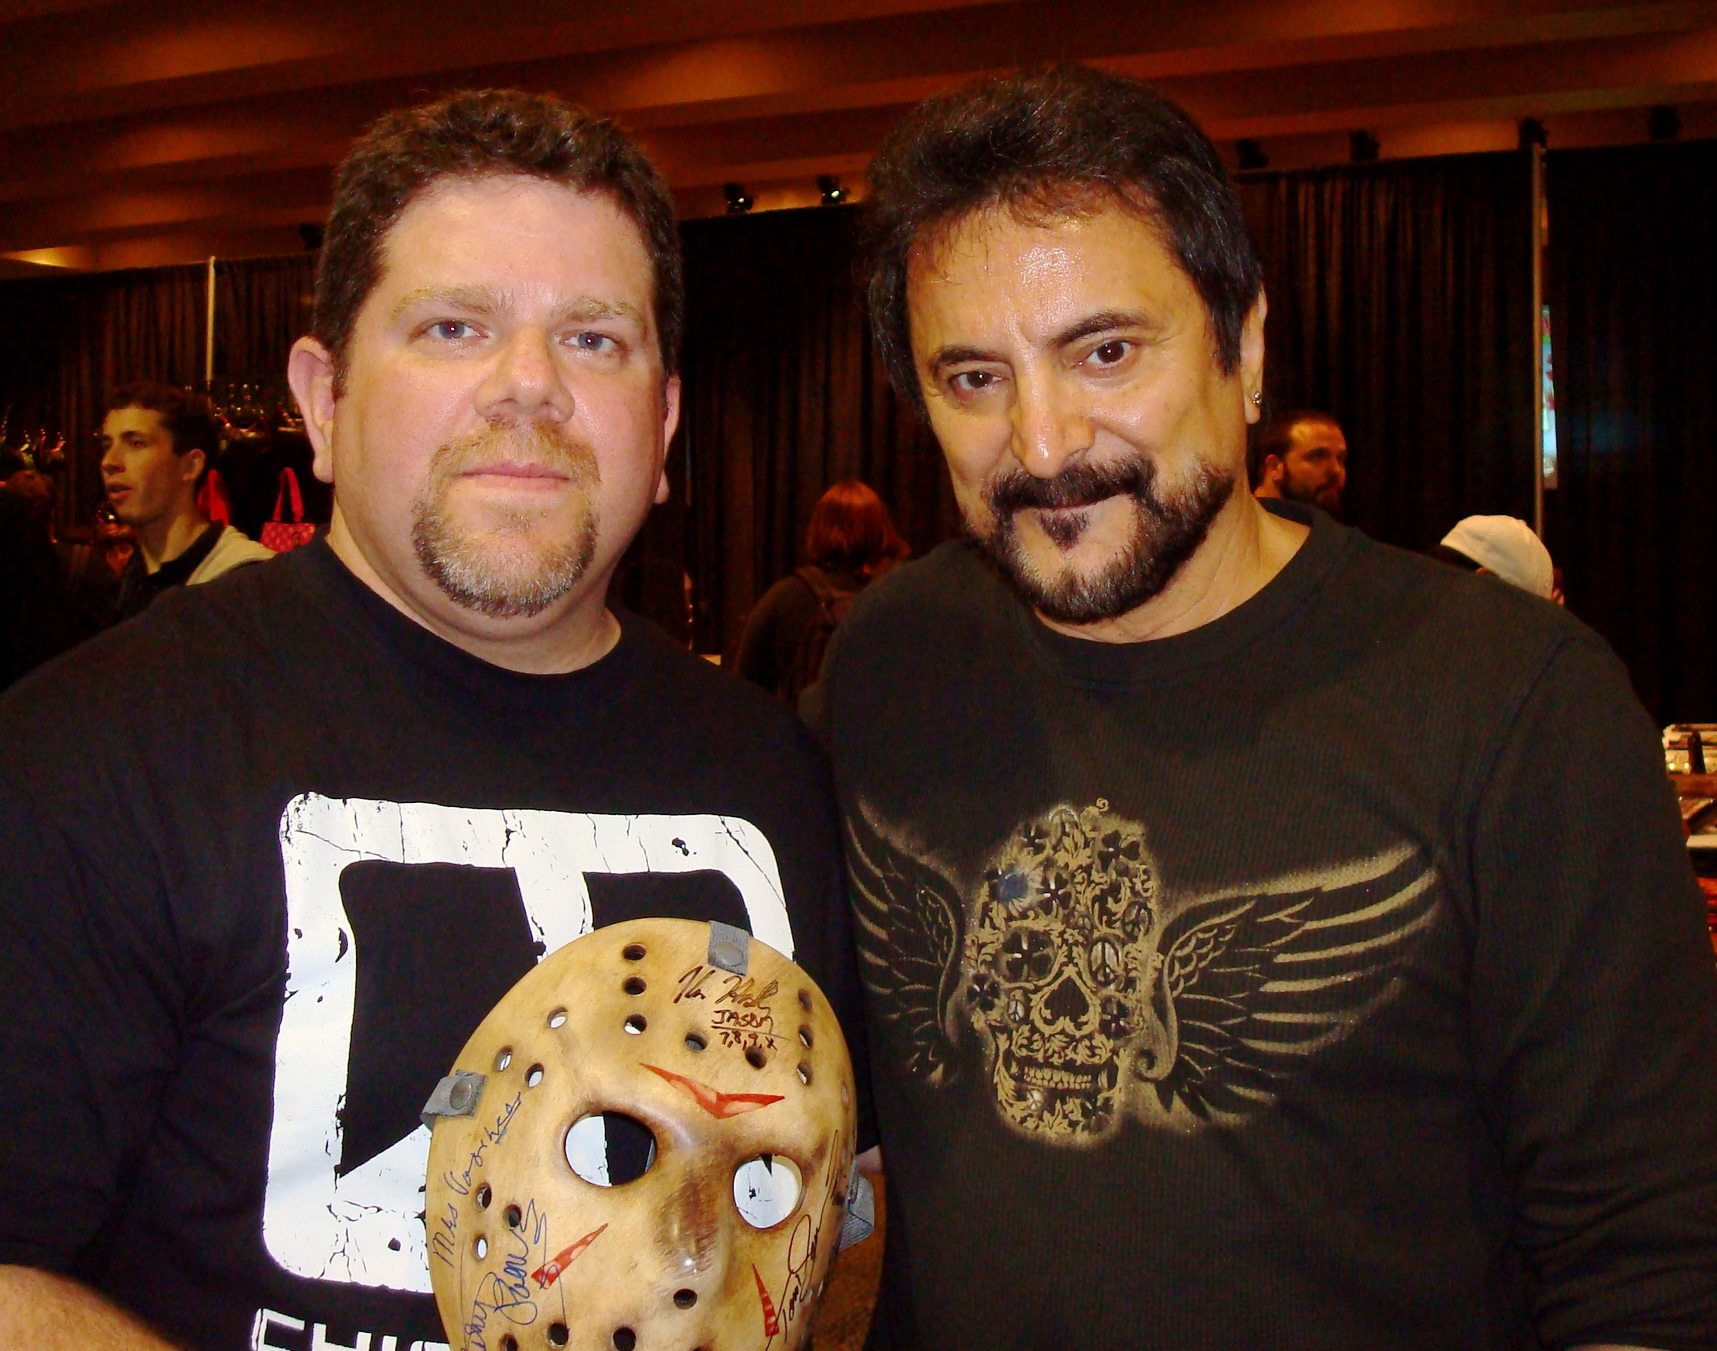 With the legendary Tom Savini, master of horror effects, in NYC